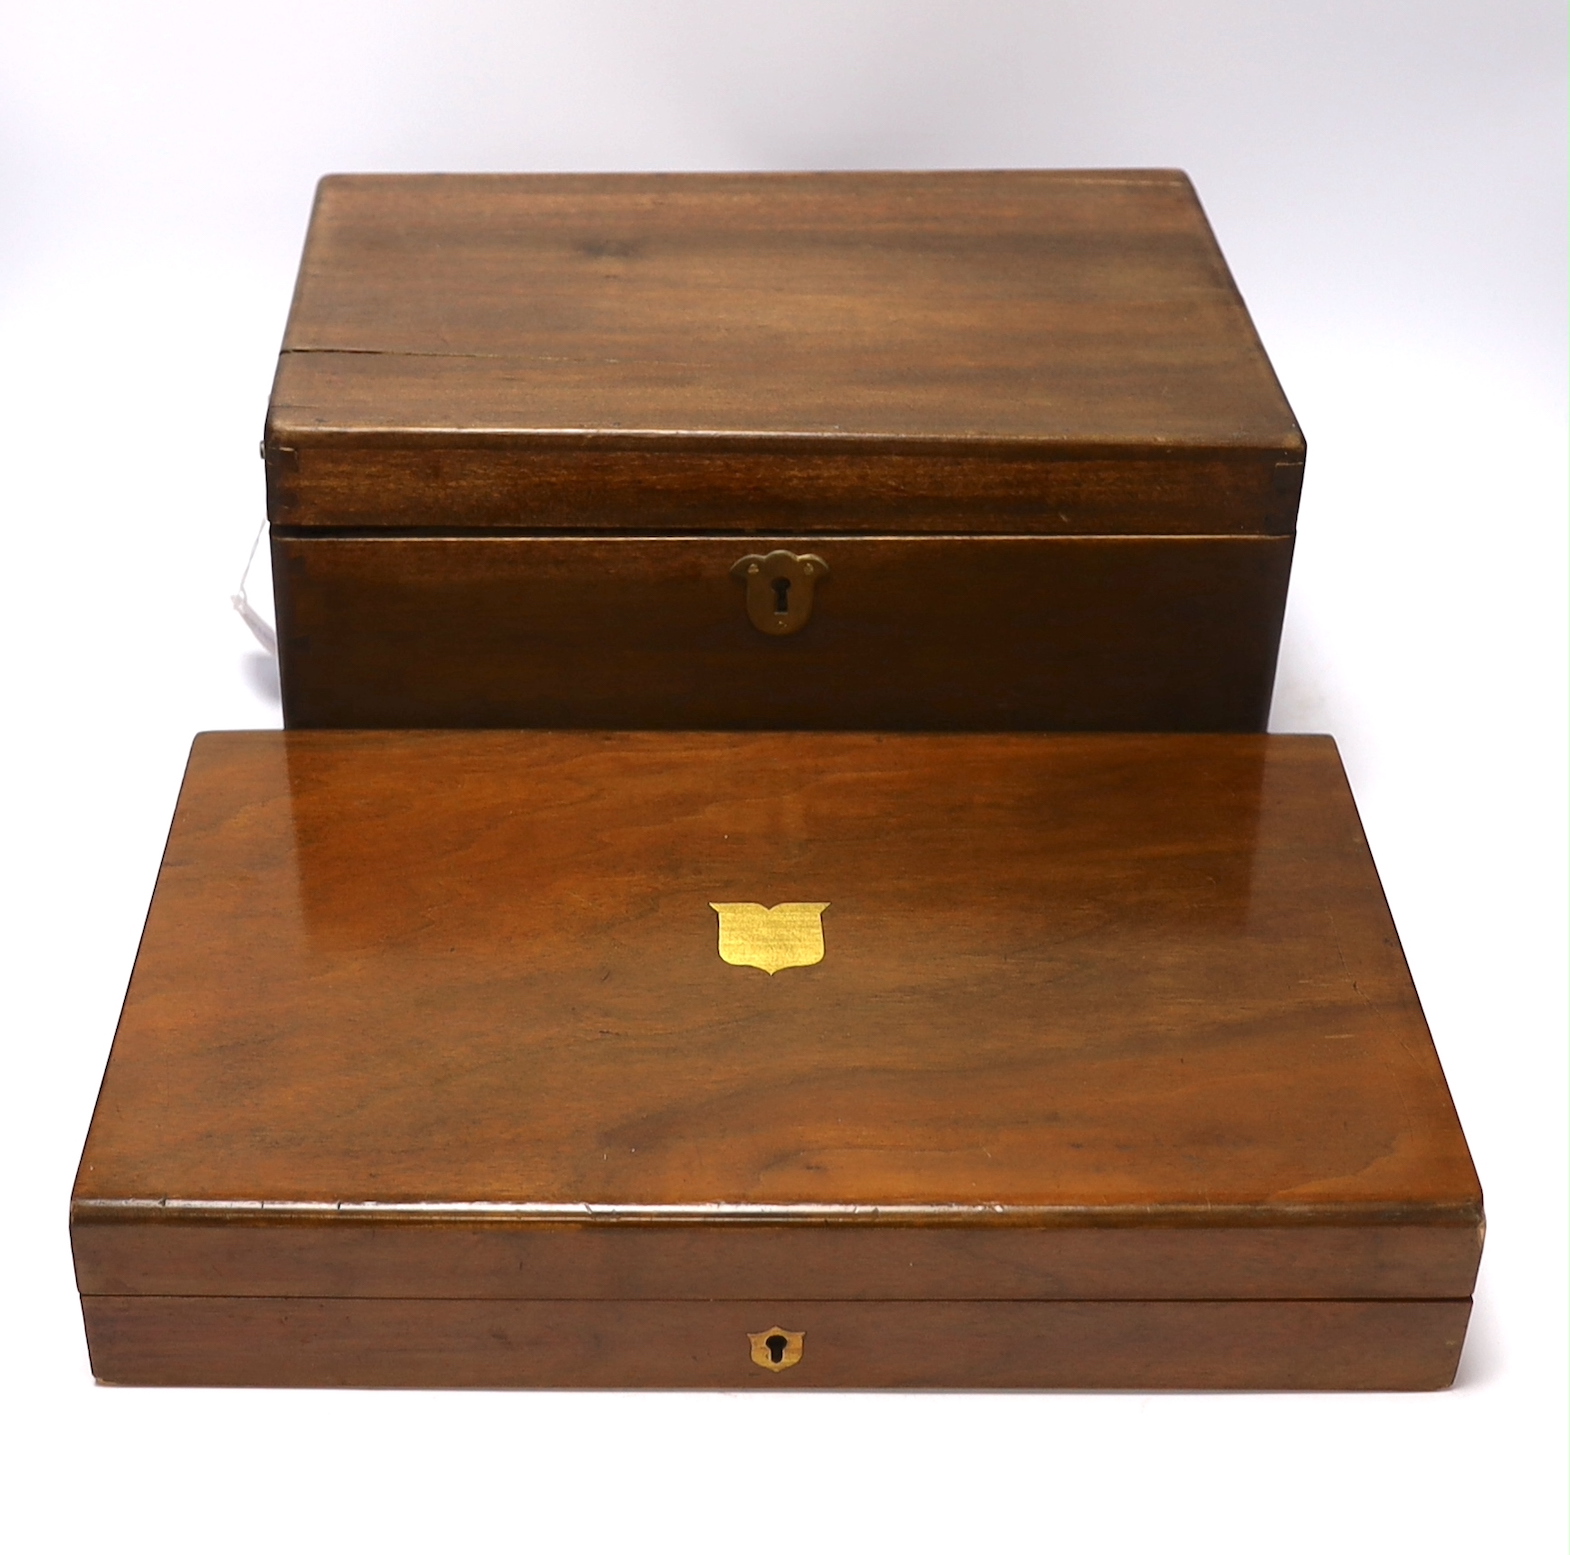 Two mahogany boxes of gun tools, including; bullet moulds, files, a vice, musket balls, etc.                                                                                                                                